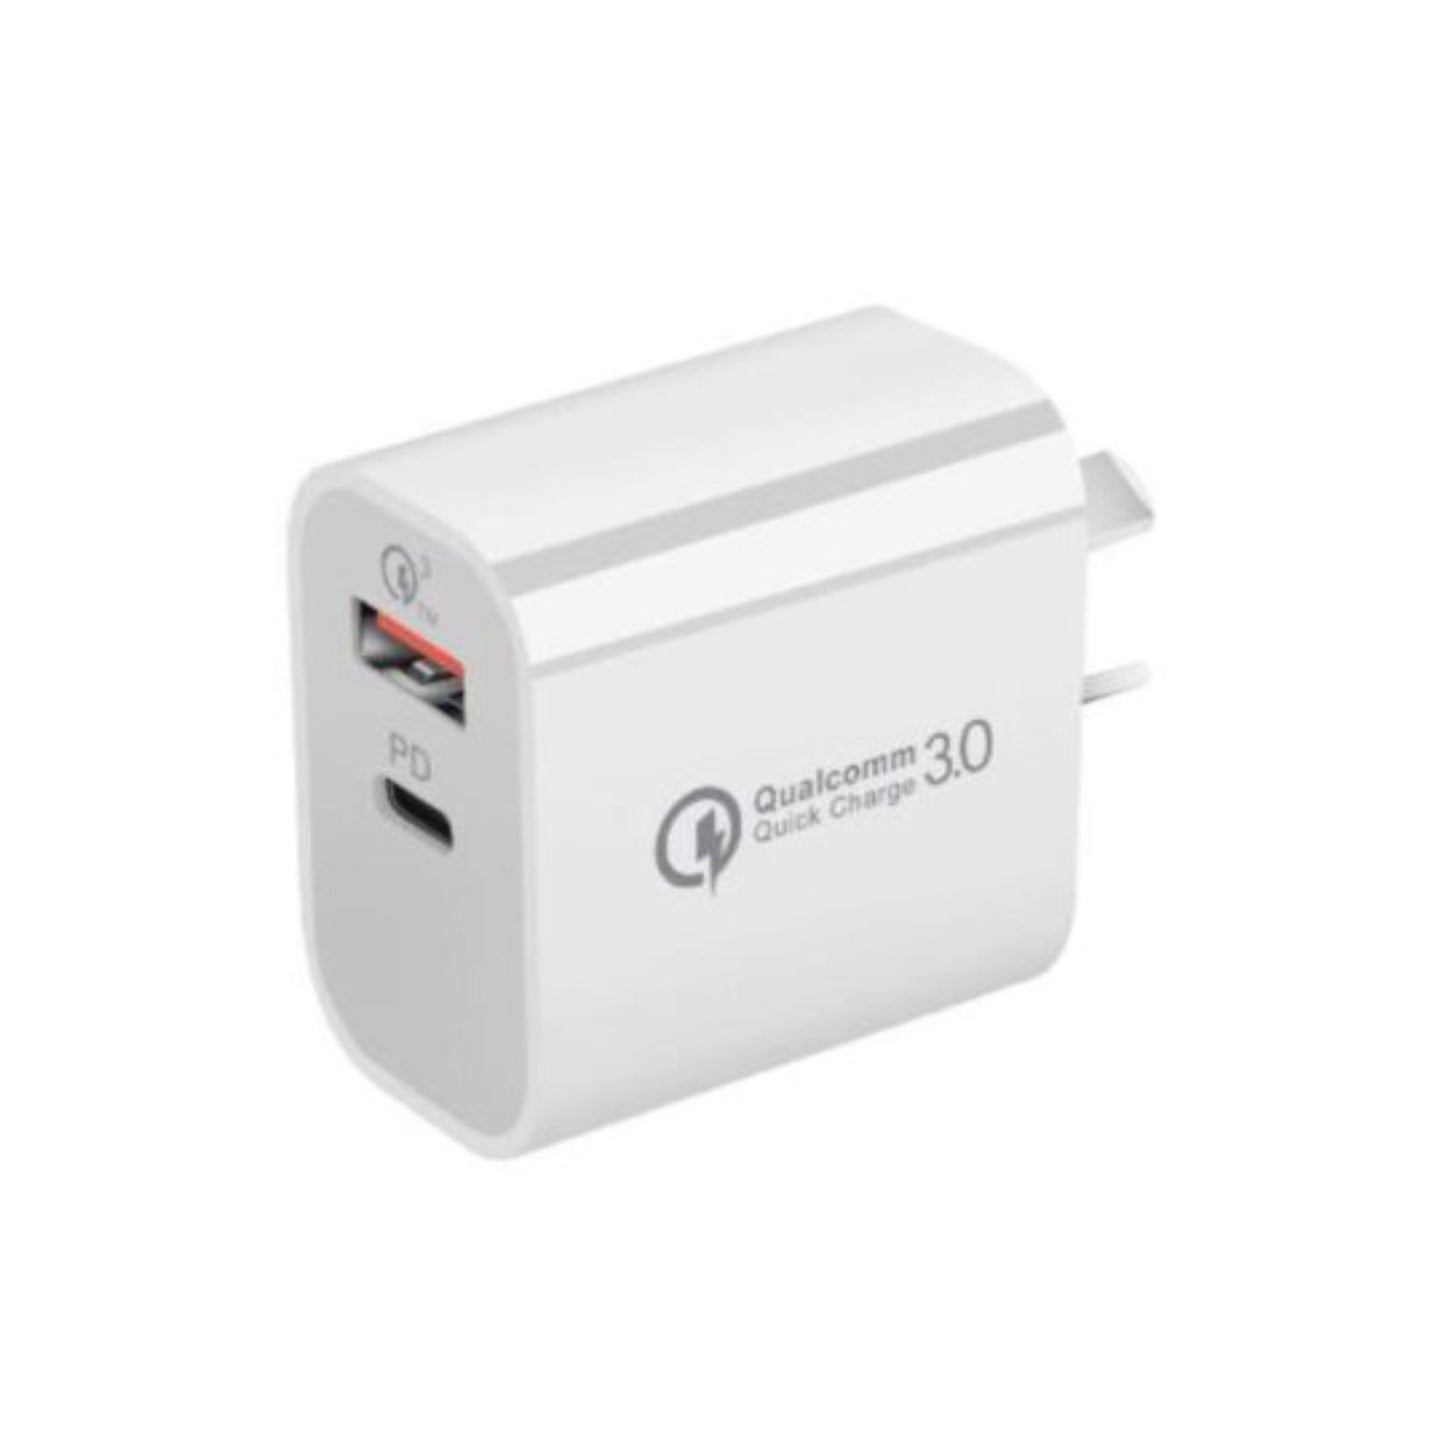 Buy Pronto Type-C And USB Quick Wall Charger at Topic Store